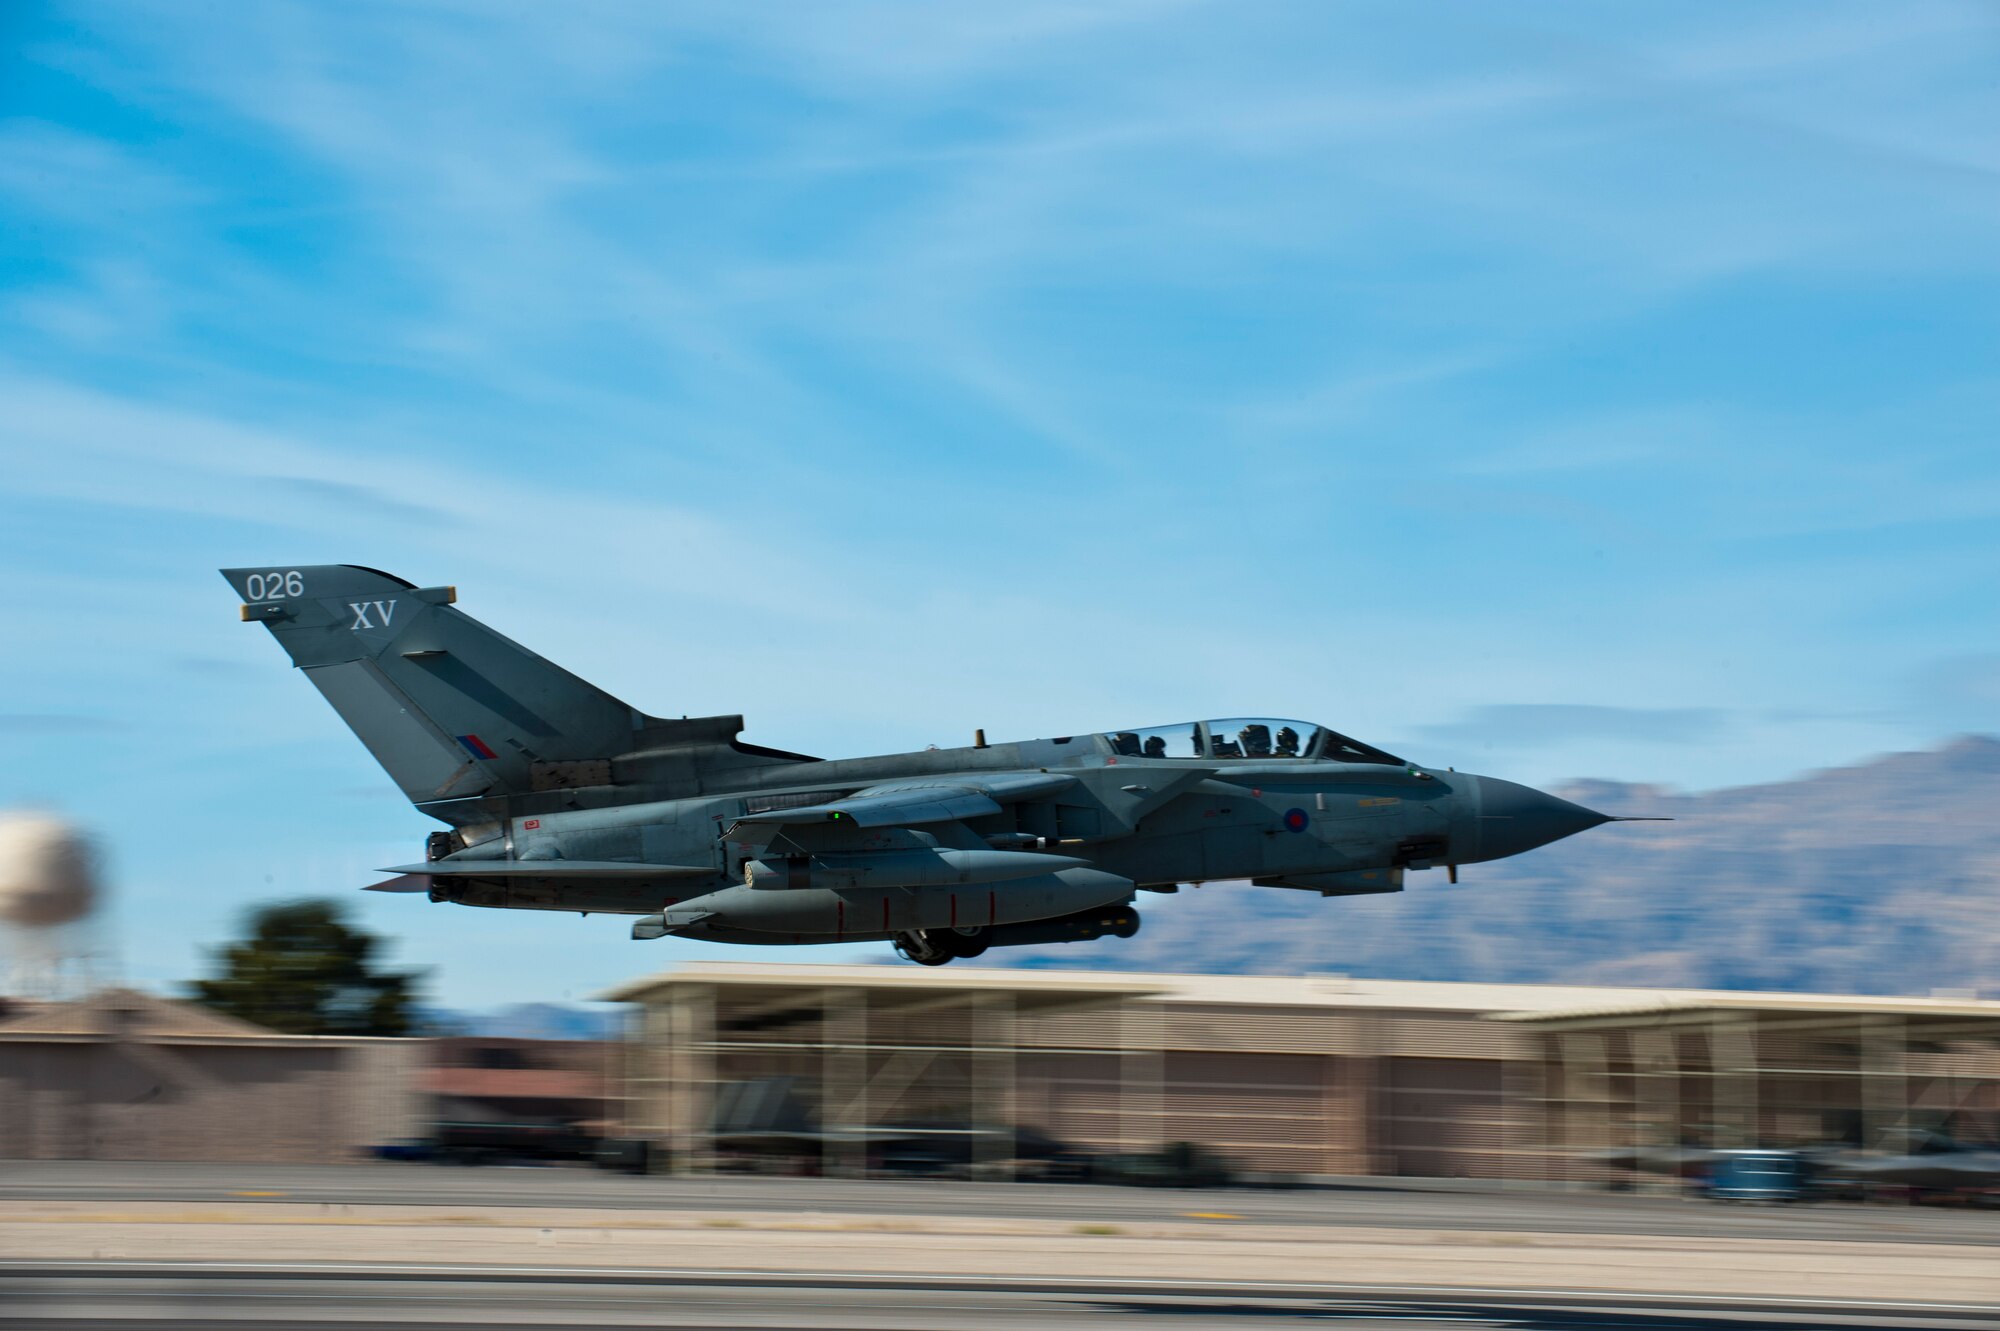 A Royal Air Force Tornado GR4 assigned to the IX Bomber Squadron from Royal Air Force Station Marham, United Kingdom, takes off during Red Flag 14-1 Jan. 28, 2014, at Nellis Air Force Base, Nev. Red Flag gives aircrews and air support operations service members from various airframes, military services and allied countries an opportunity to integrate and practice combat operations. These situations provide the pilots with real-time war scenarios and also helps ground crews test and improve their combat readiness. (U.S. Air Force photo by Airman 1st Class Thomas Spangler)  